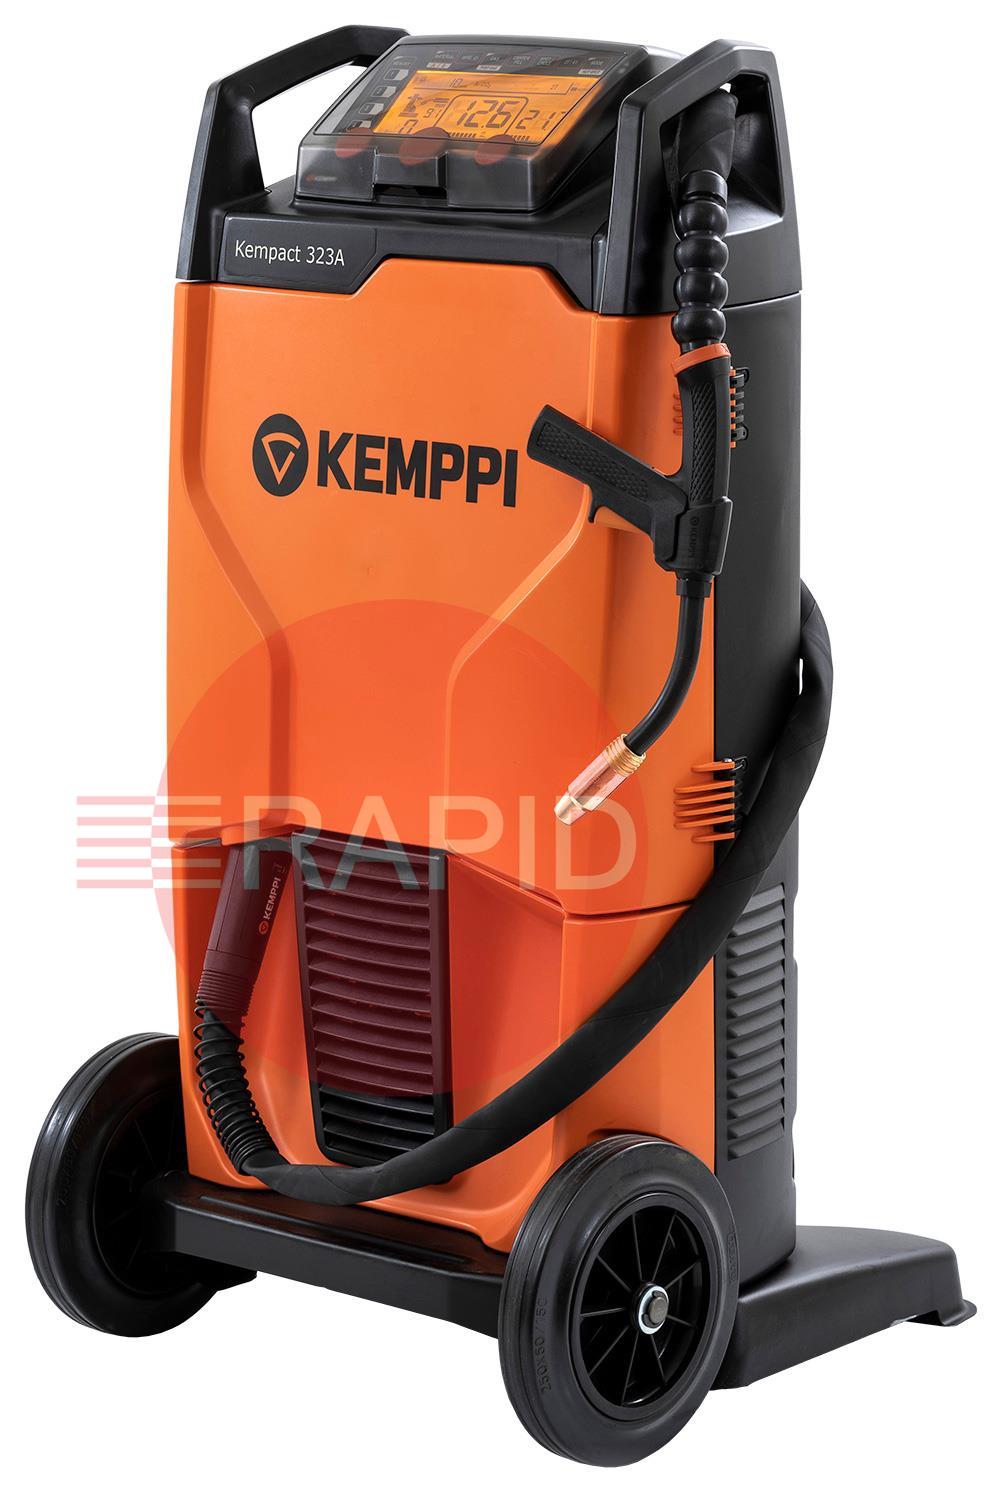 P2232GXE  Kemppi Kempact RA 323A, 320A 3 Phase 400V MIG Welder, with Flexlite GXe 305G 5.0m Torch